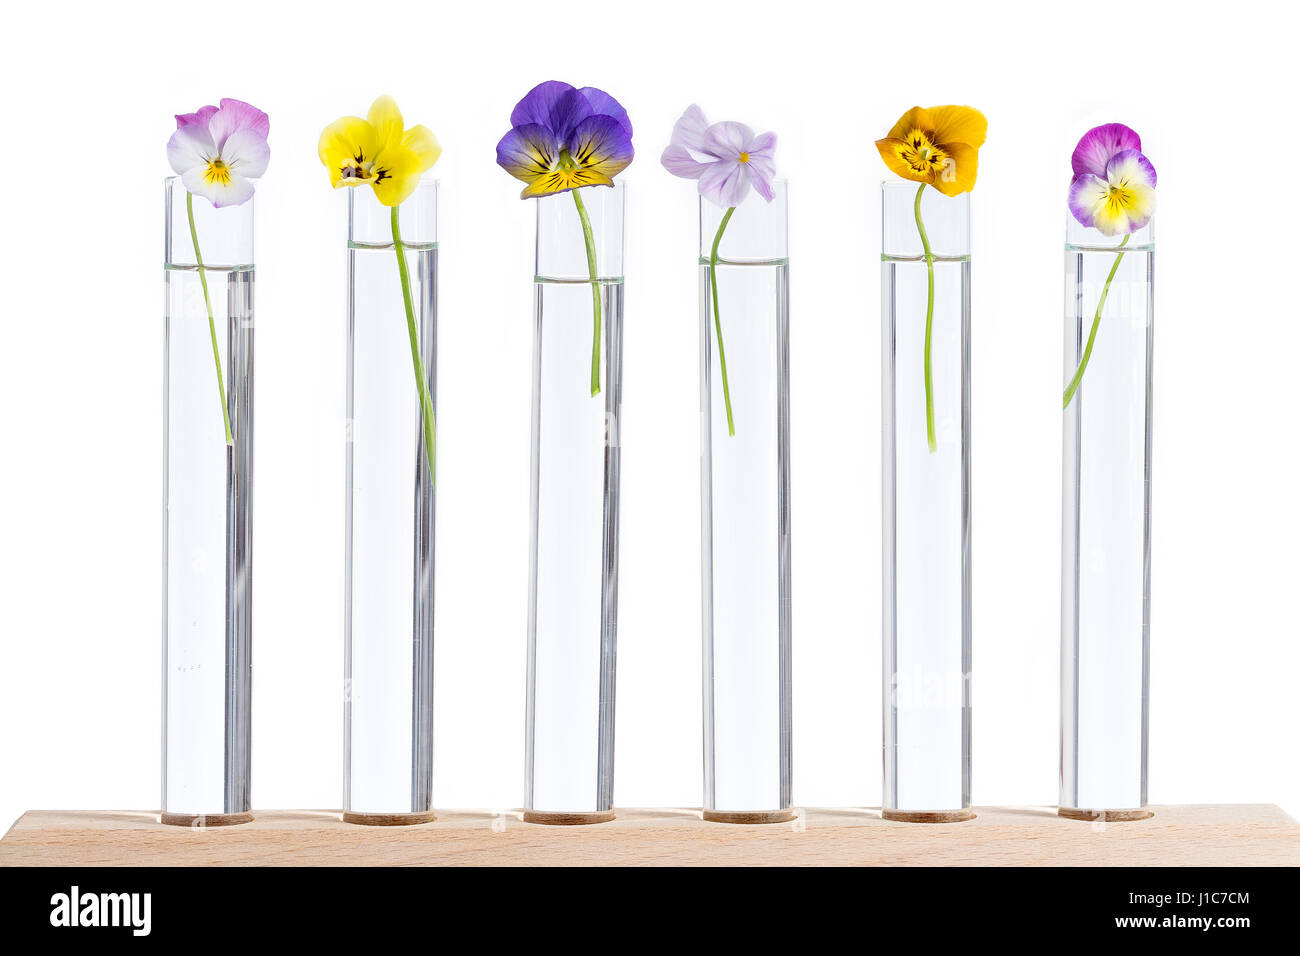 nice pansies,essential oil in glass test tubes Stock Photo